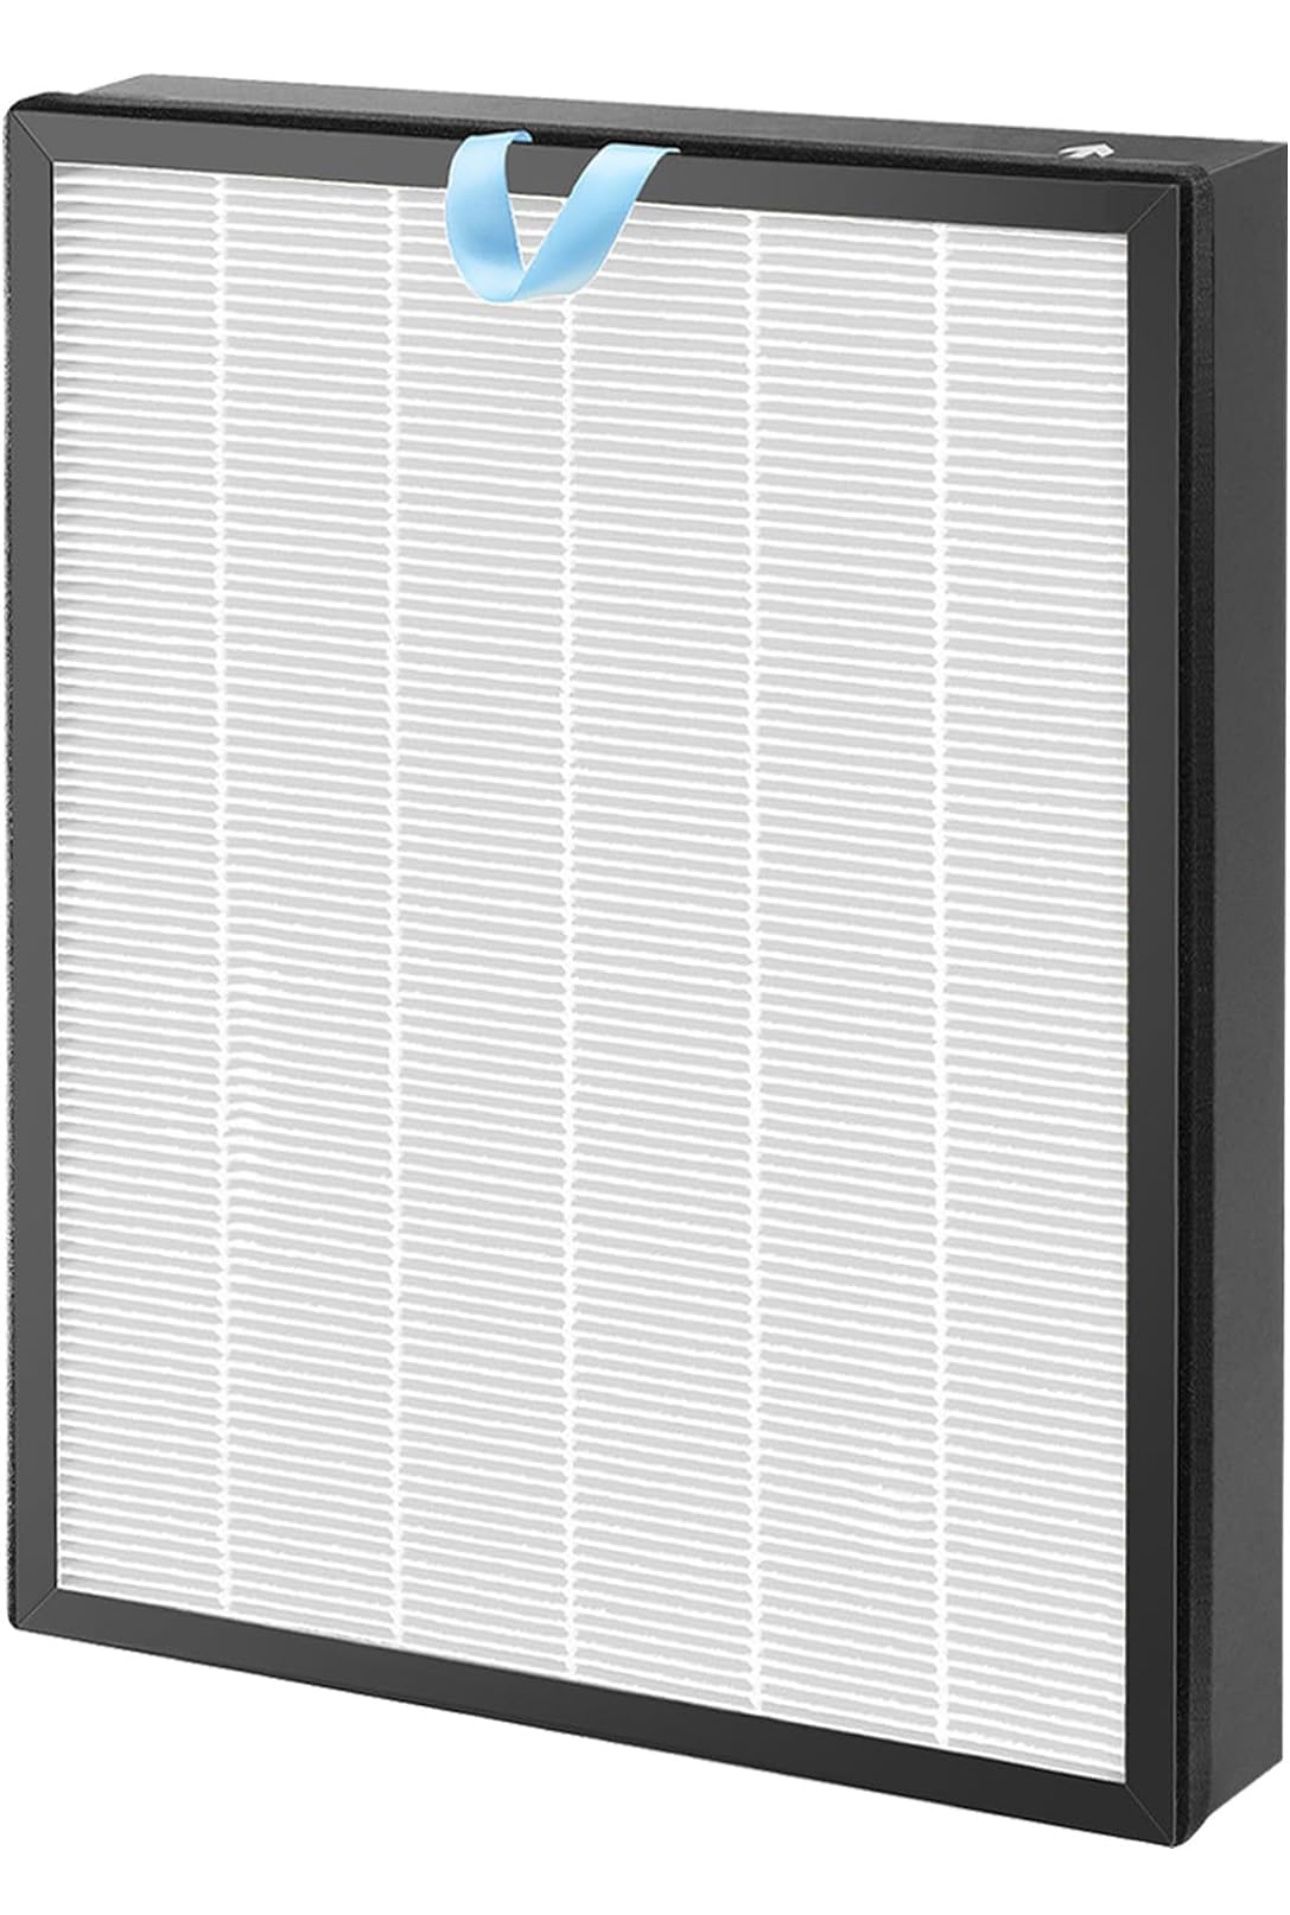 Vital 100S Replacement Filter Compatible with LEVOIT Vital 100S Air Puri-fier, 3-Stage Filtration with H13 True HEPA, High-Efficiency Activated Carbon